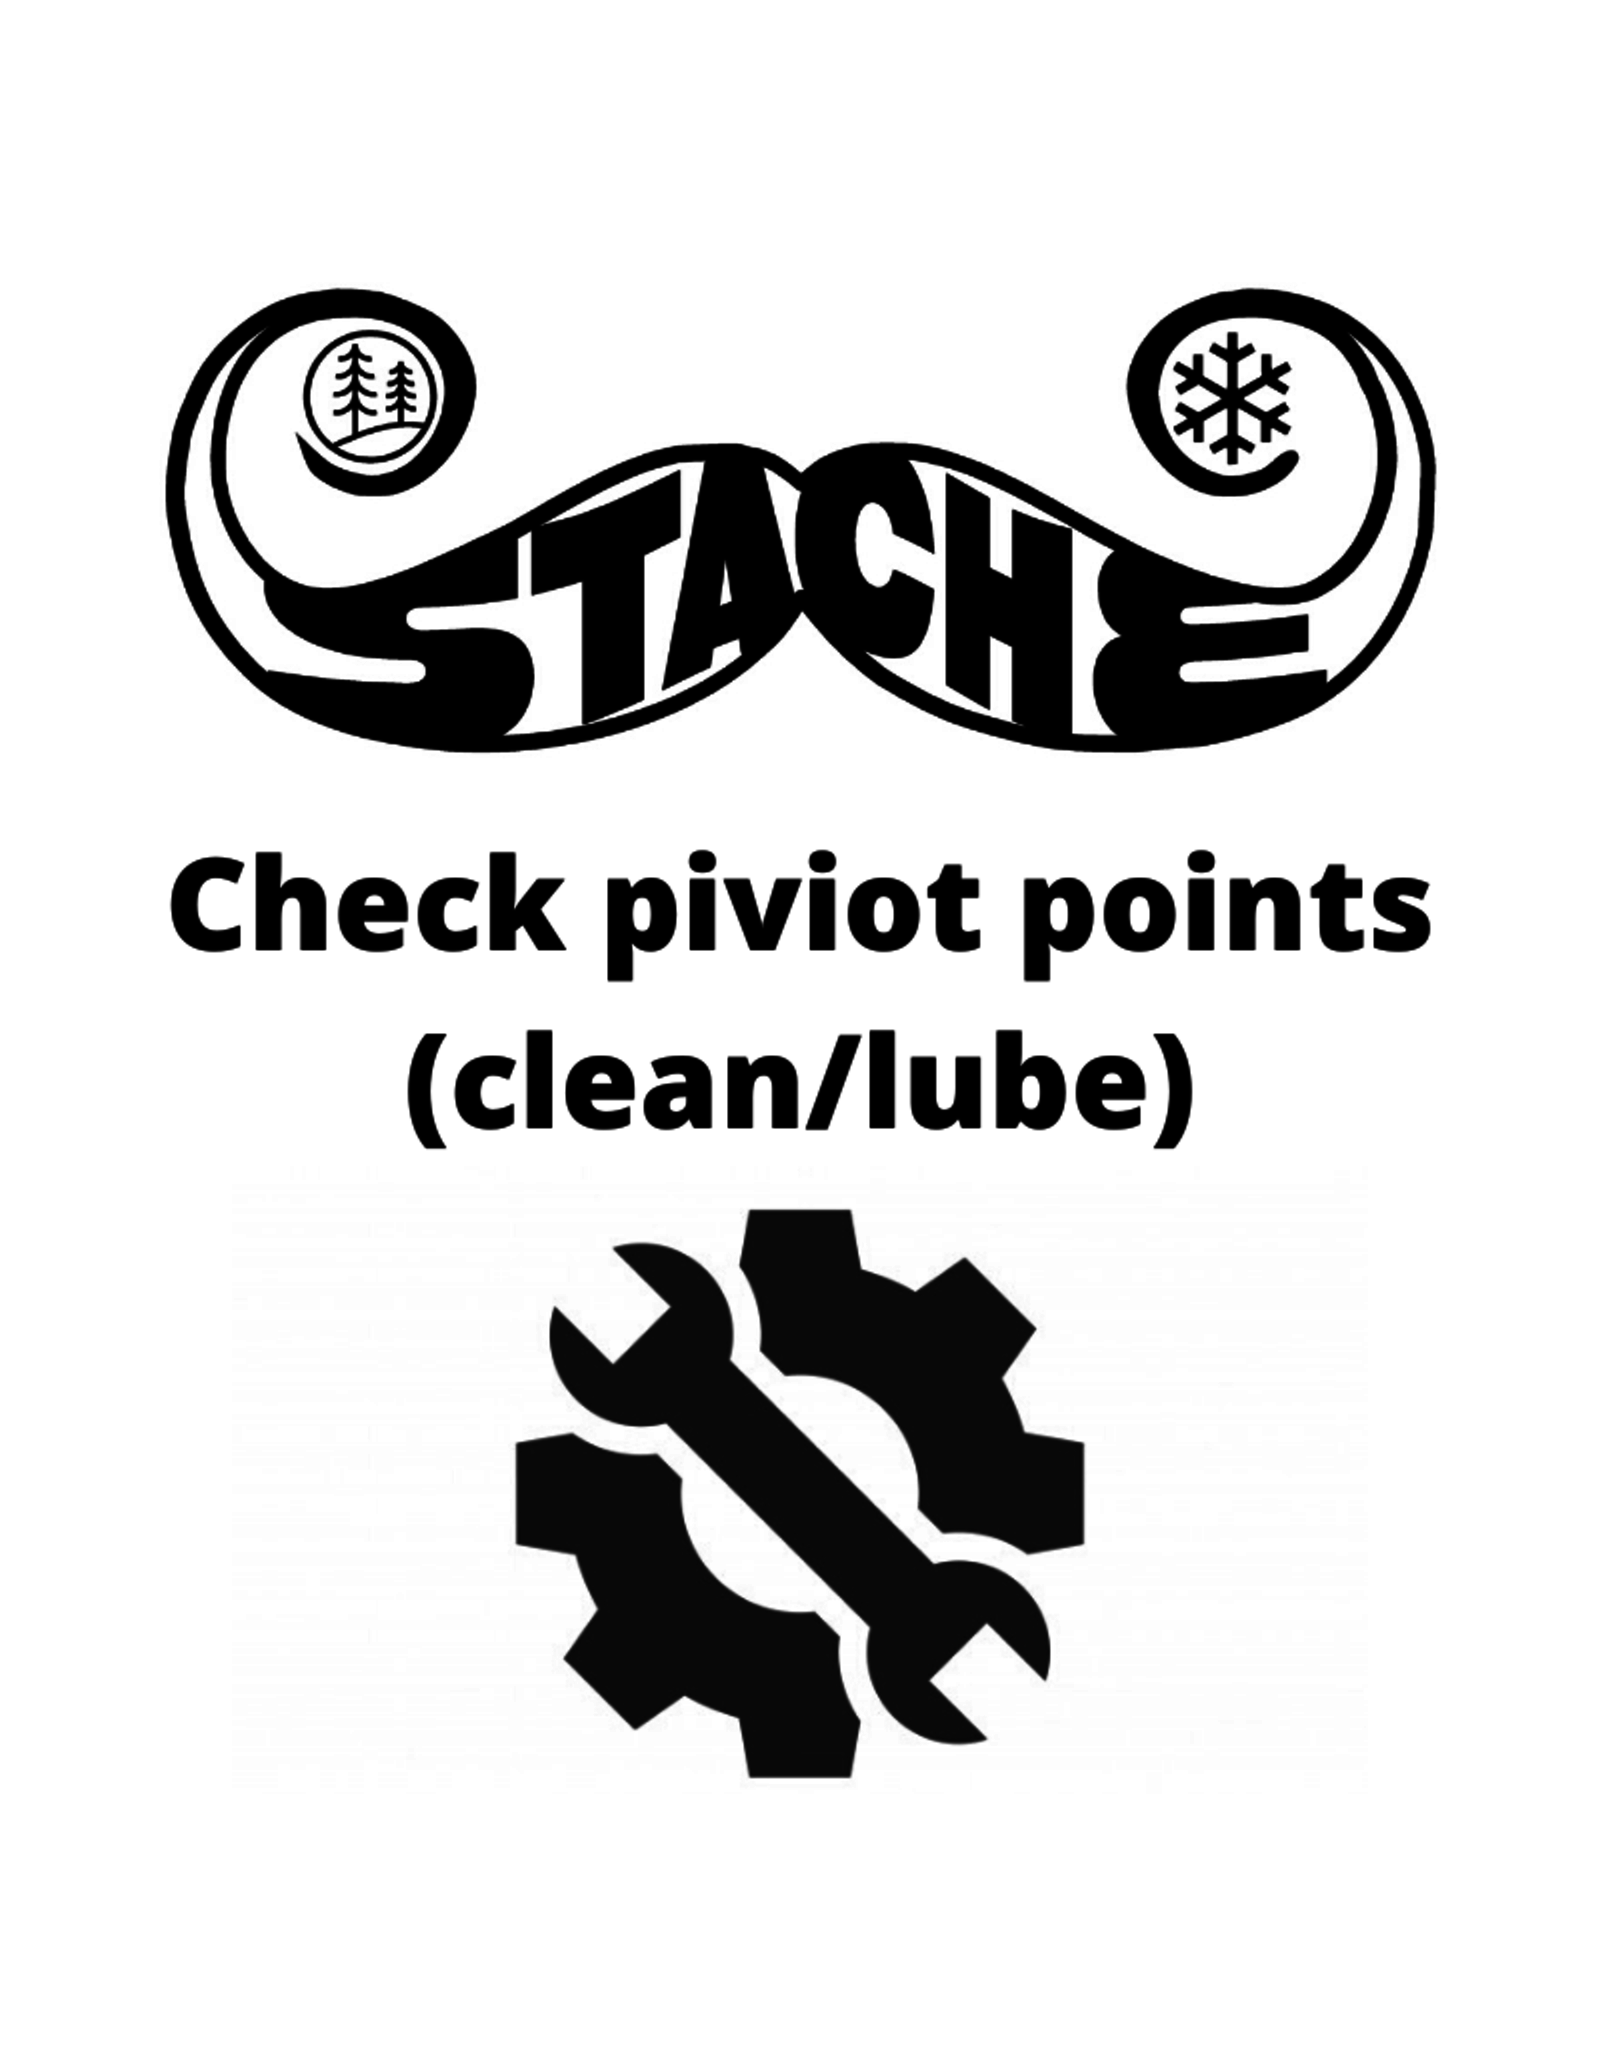 Check piviot points (clean/lube)